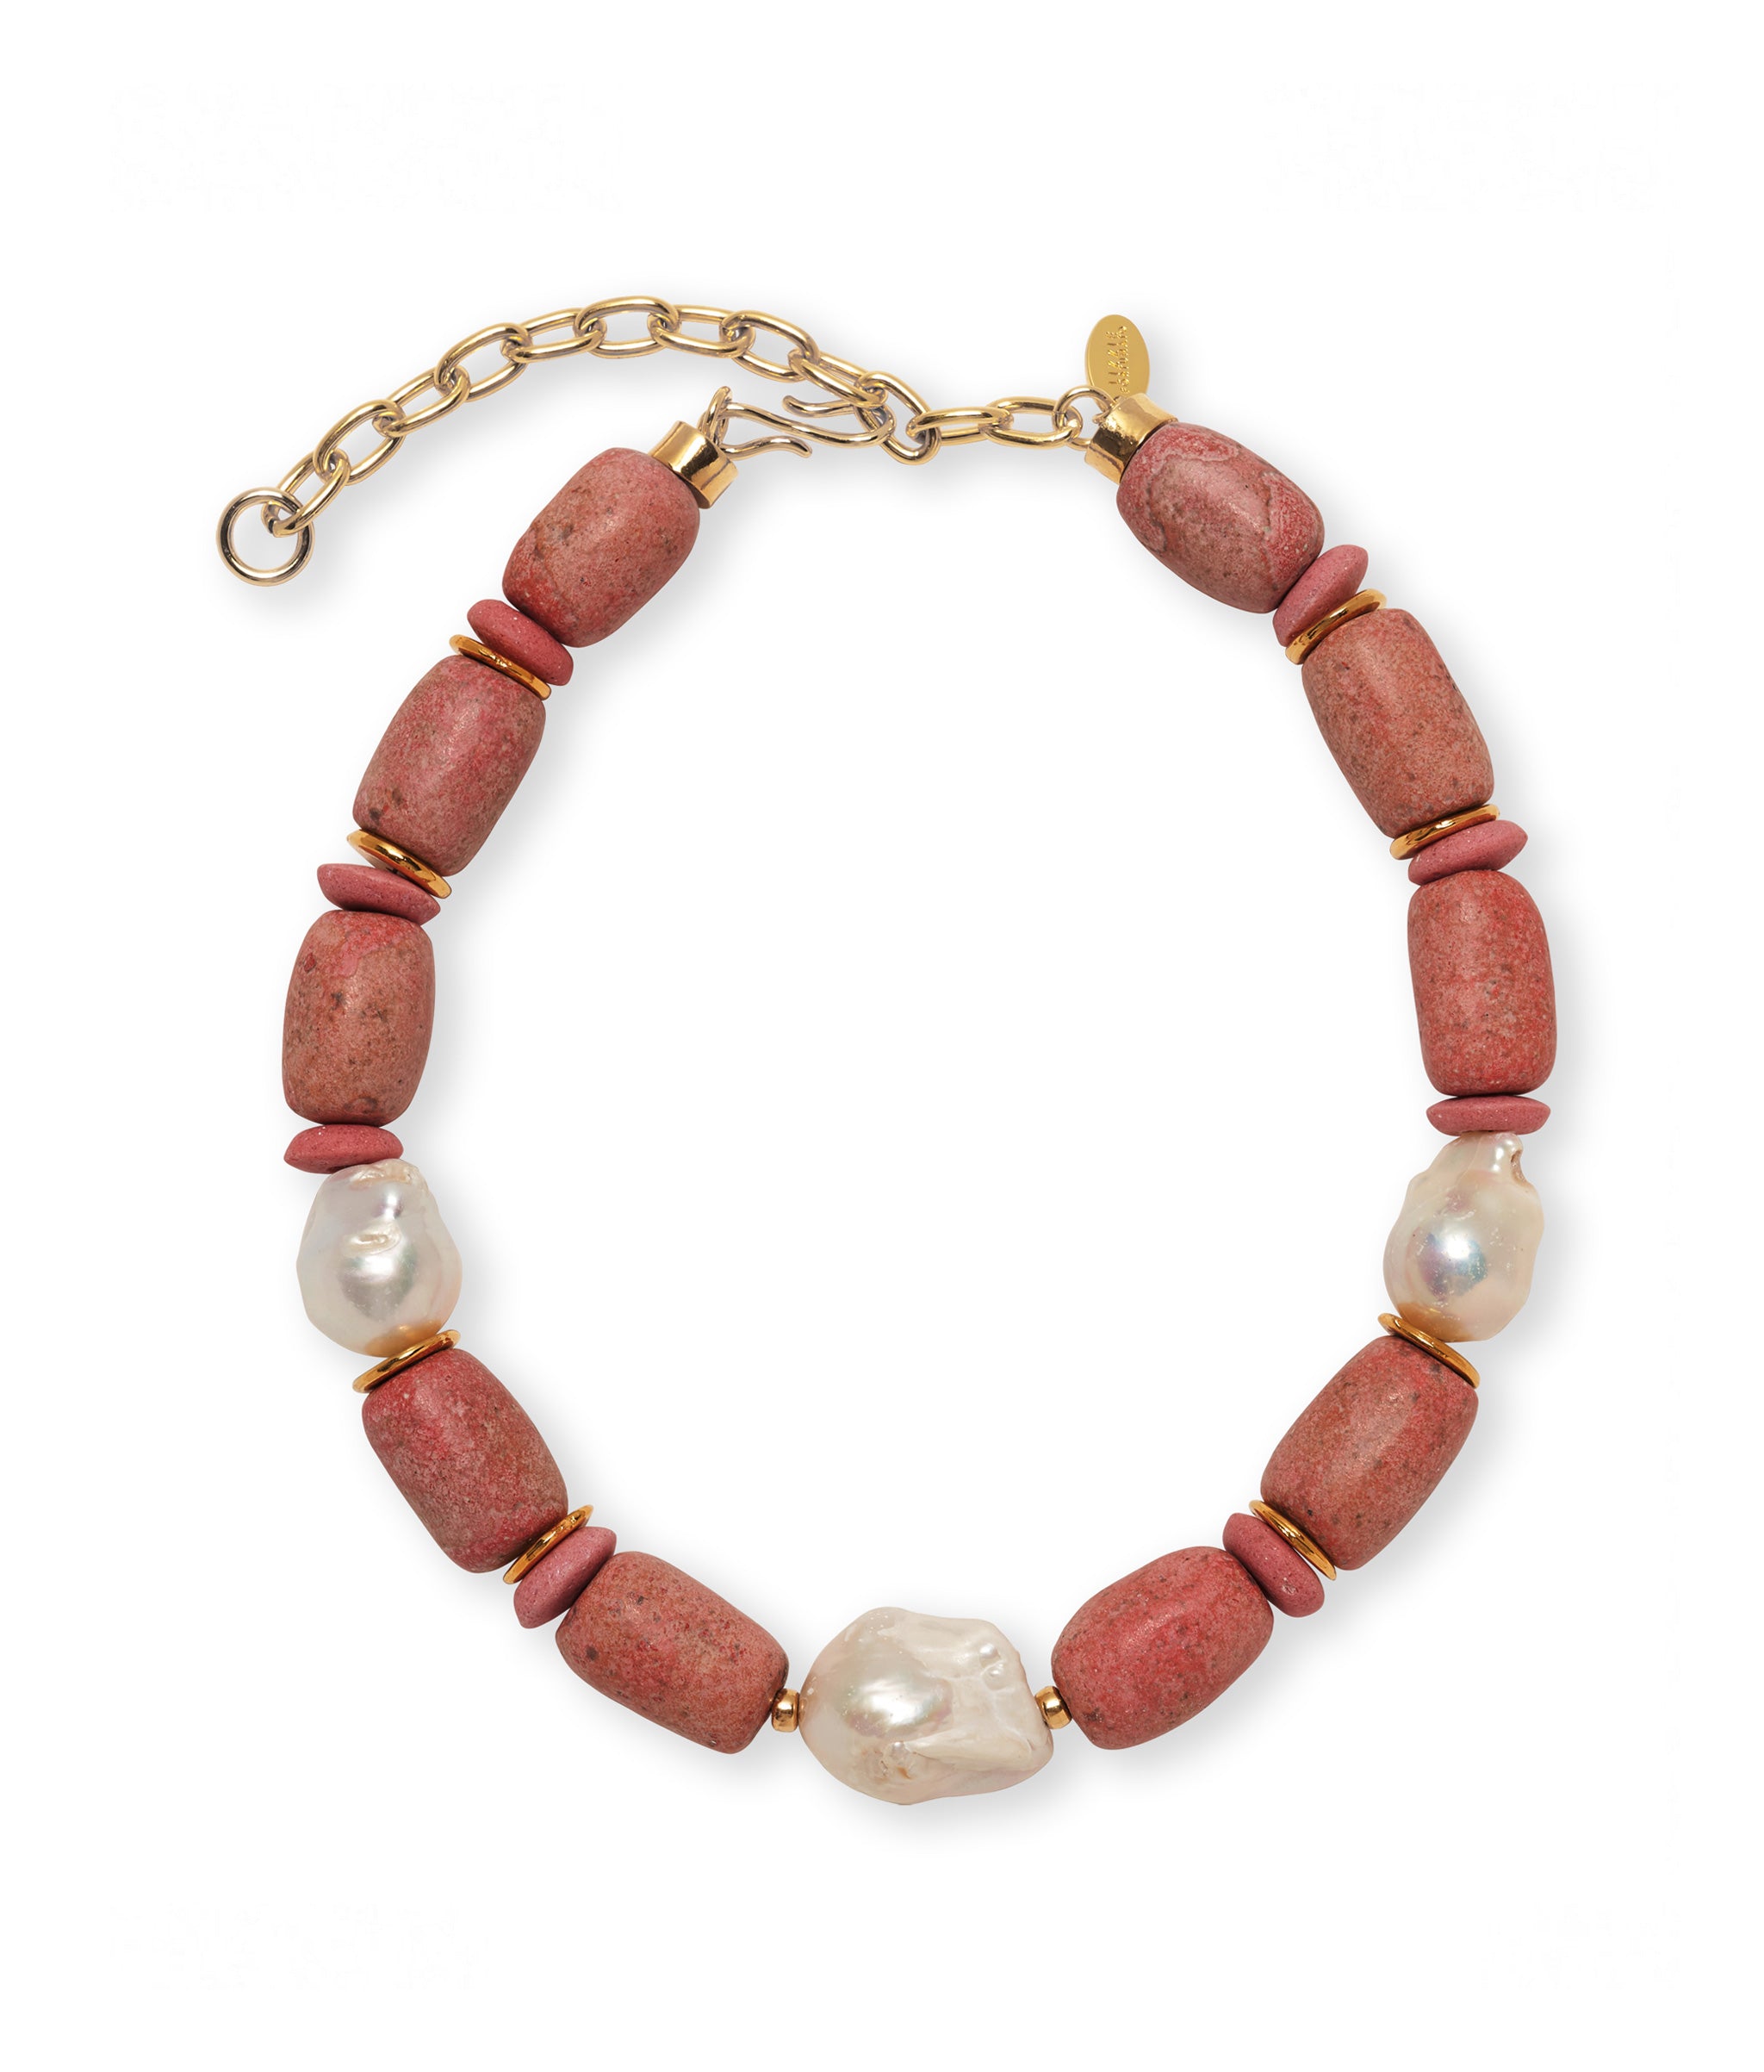 Julio Necklace. Necklace of chunky clay, recycled glass, and freshwater pearl beads.